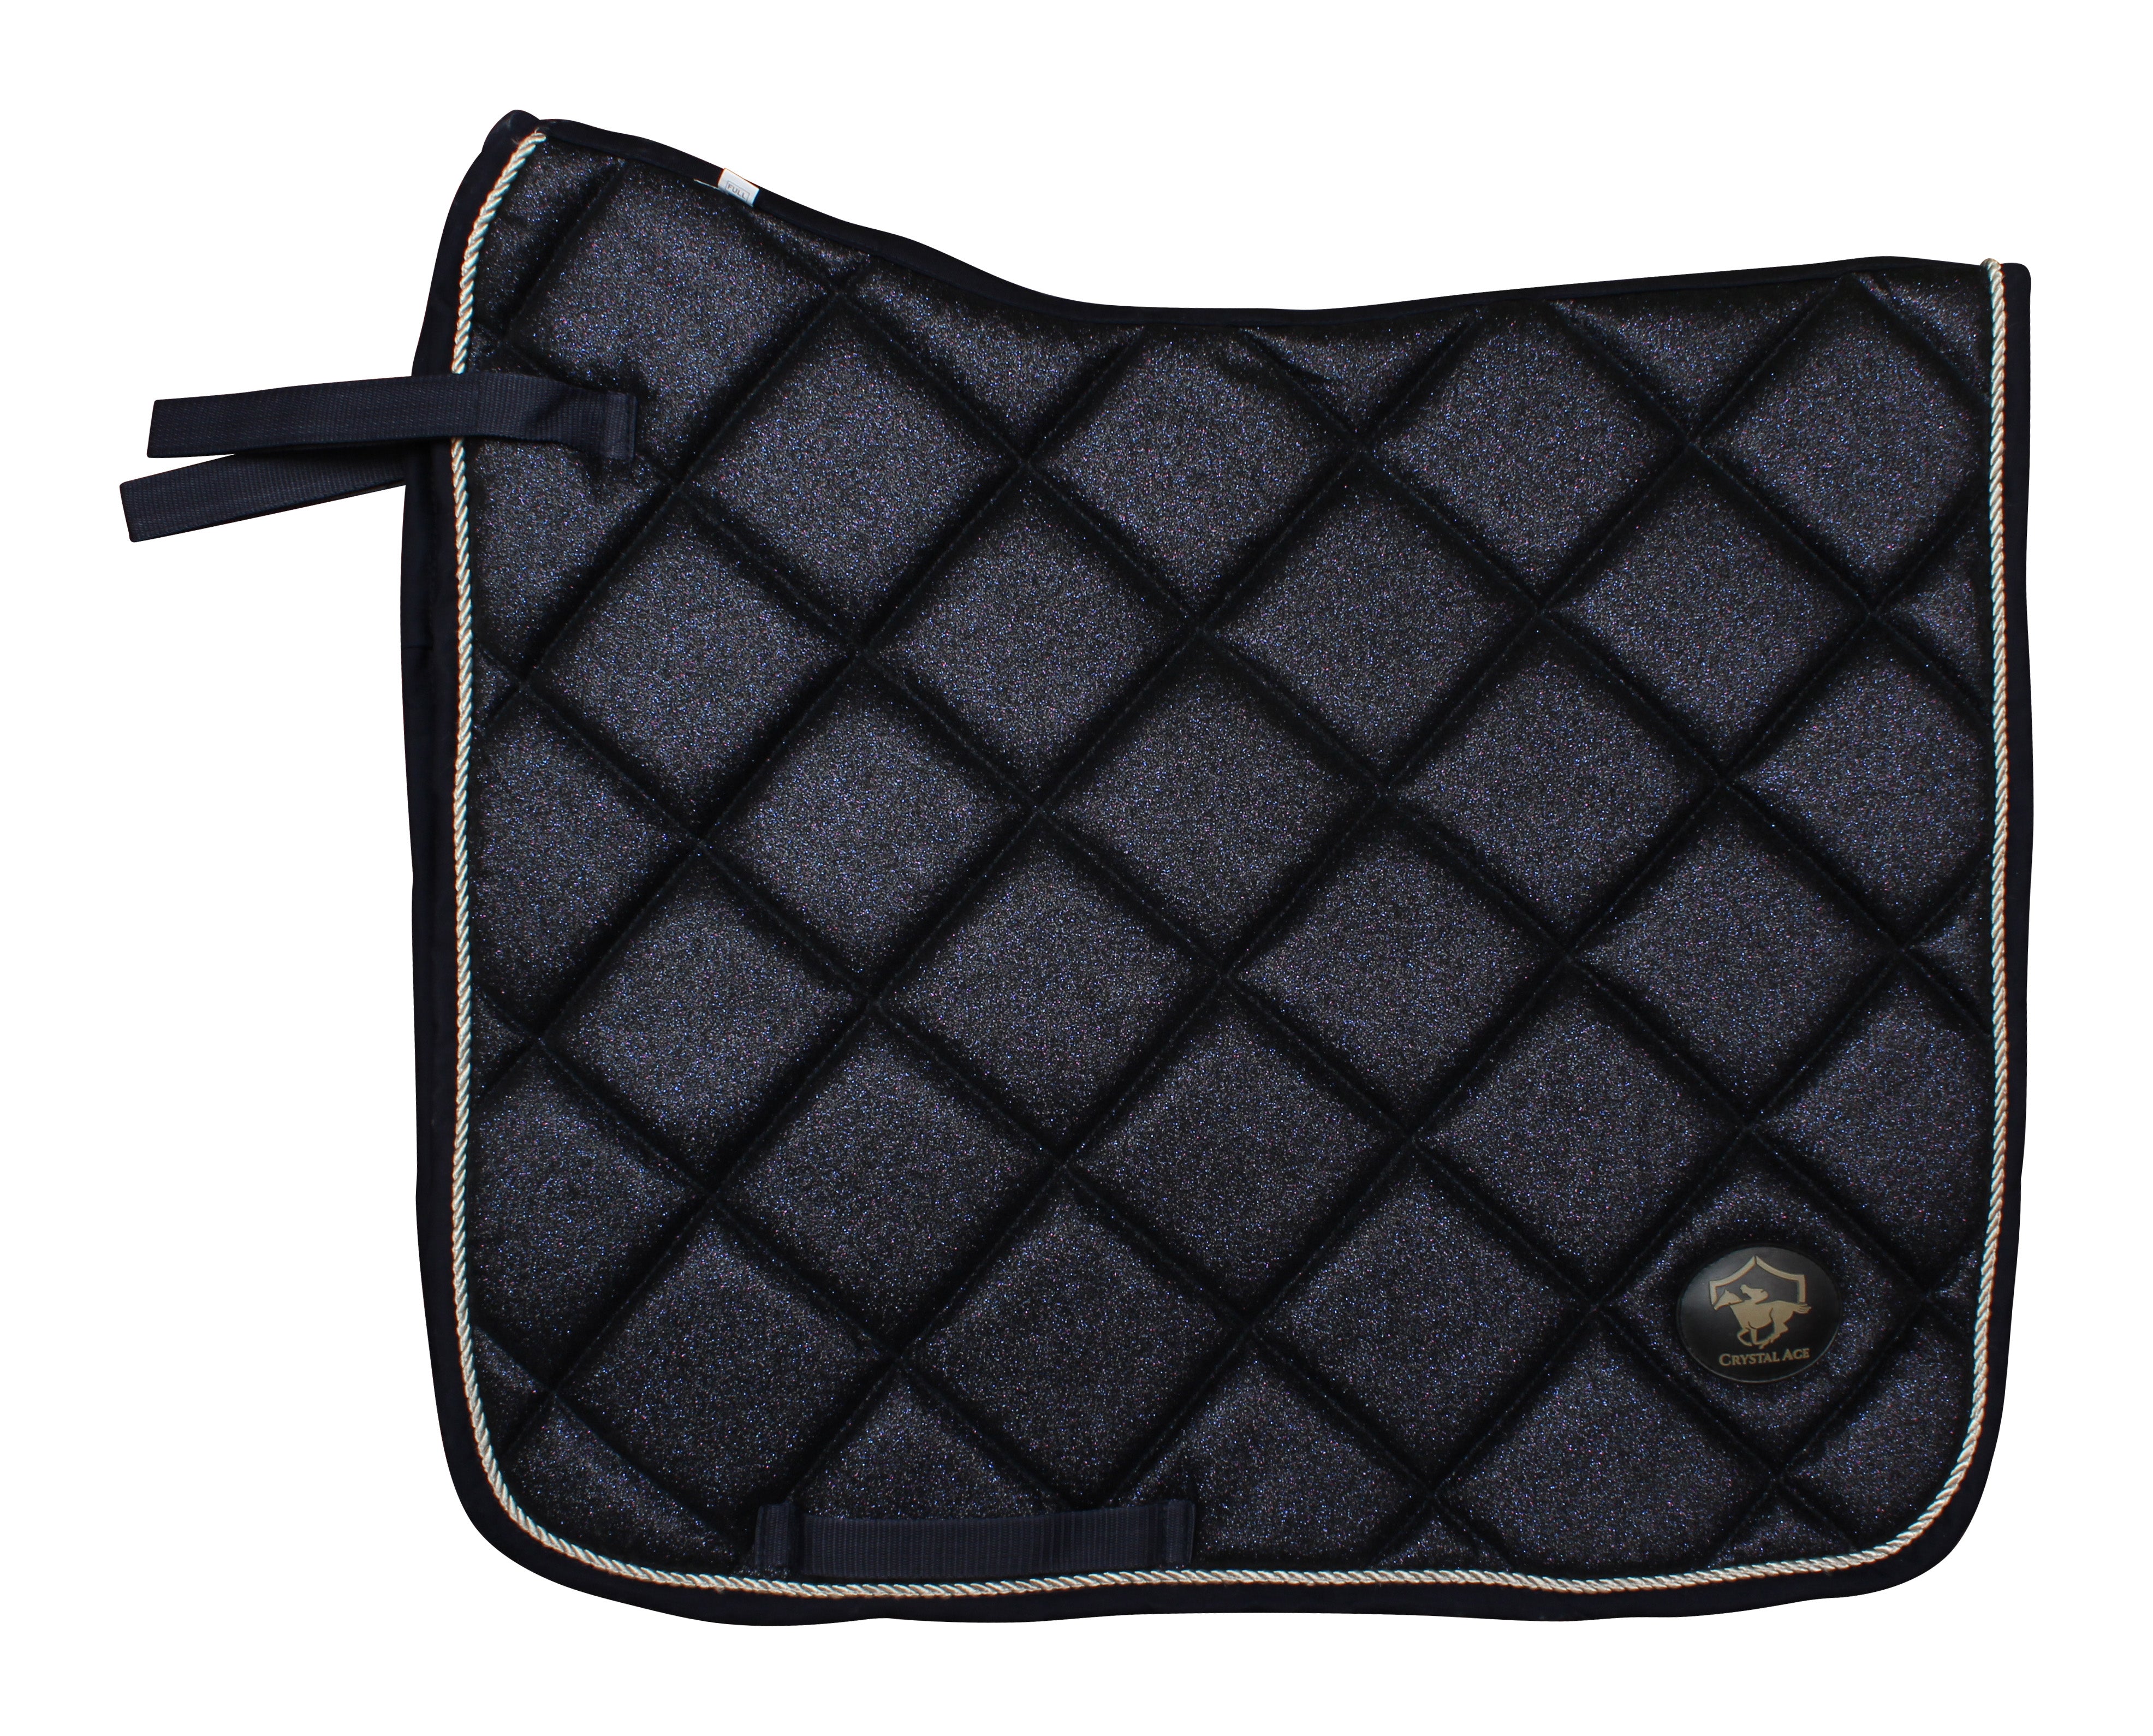 Full Horse/Cob Quilted Saddle Pad - Grey and Black